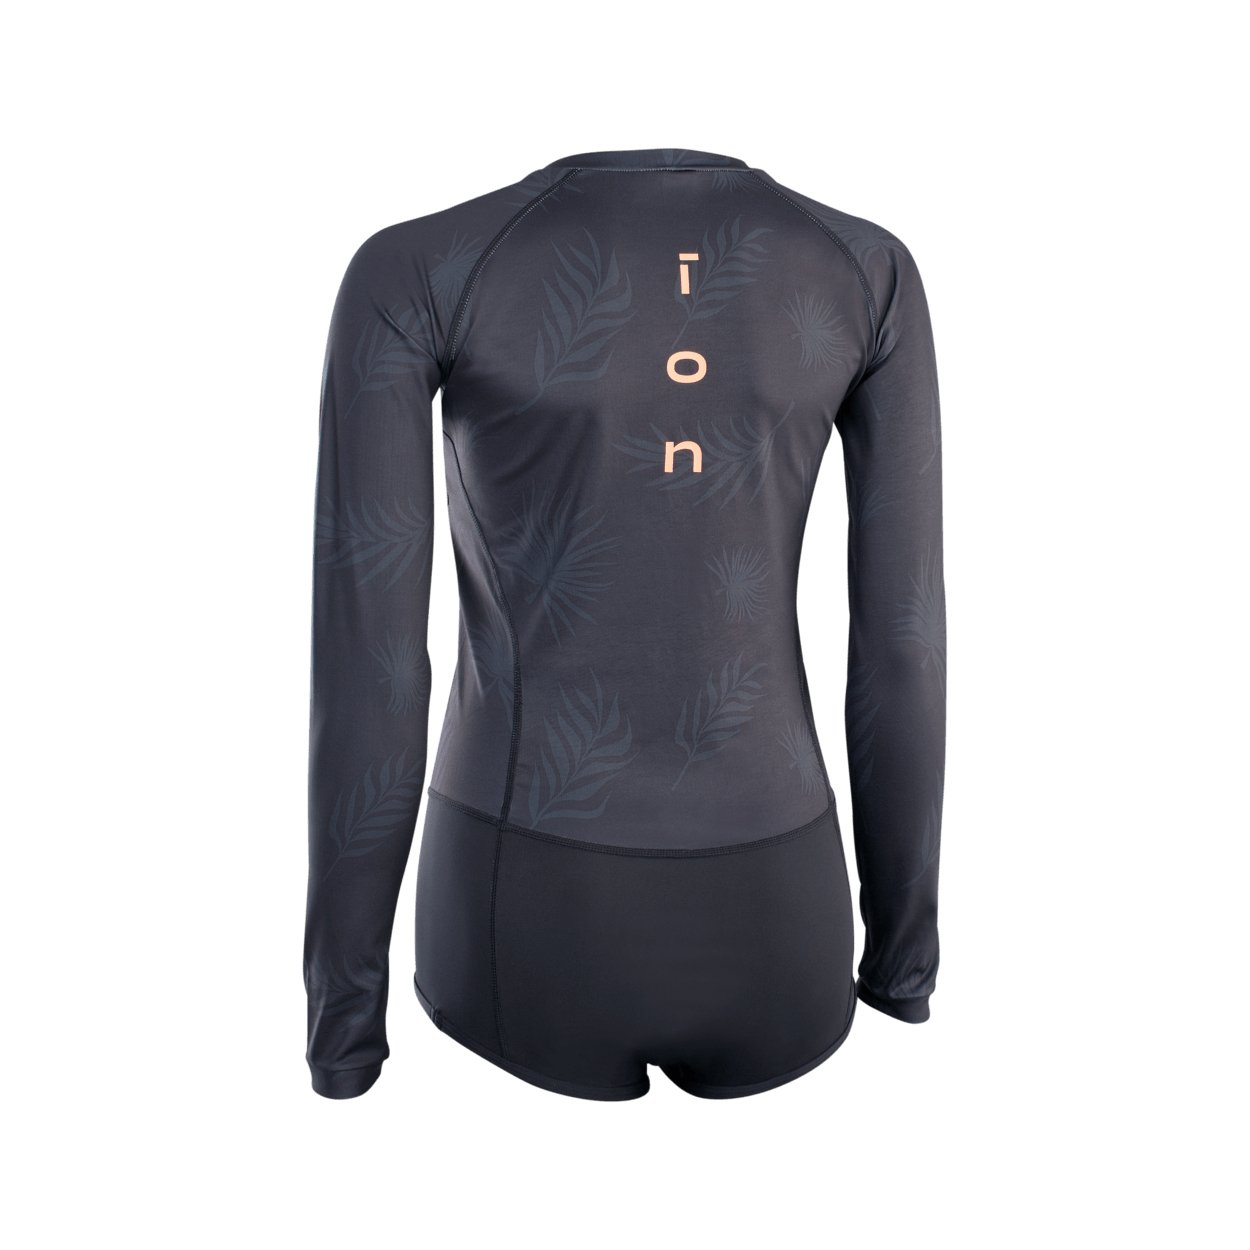 ION Swimsuit LS 2022 - Worthing Watersports - 9010583052298 - Tops - ION Water